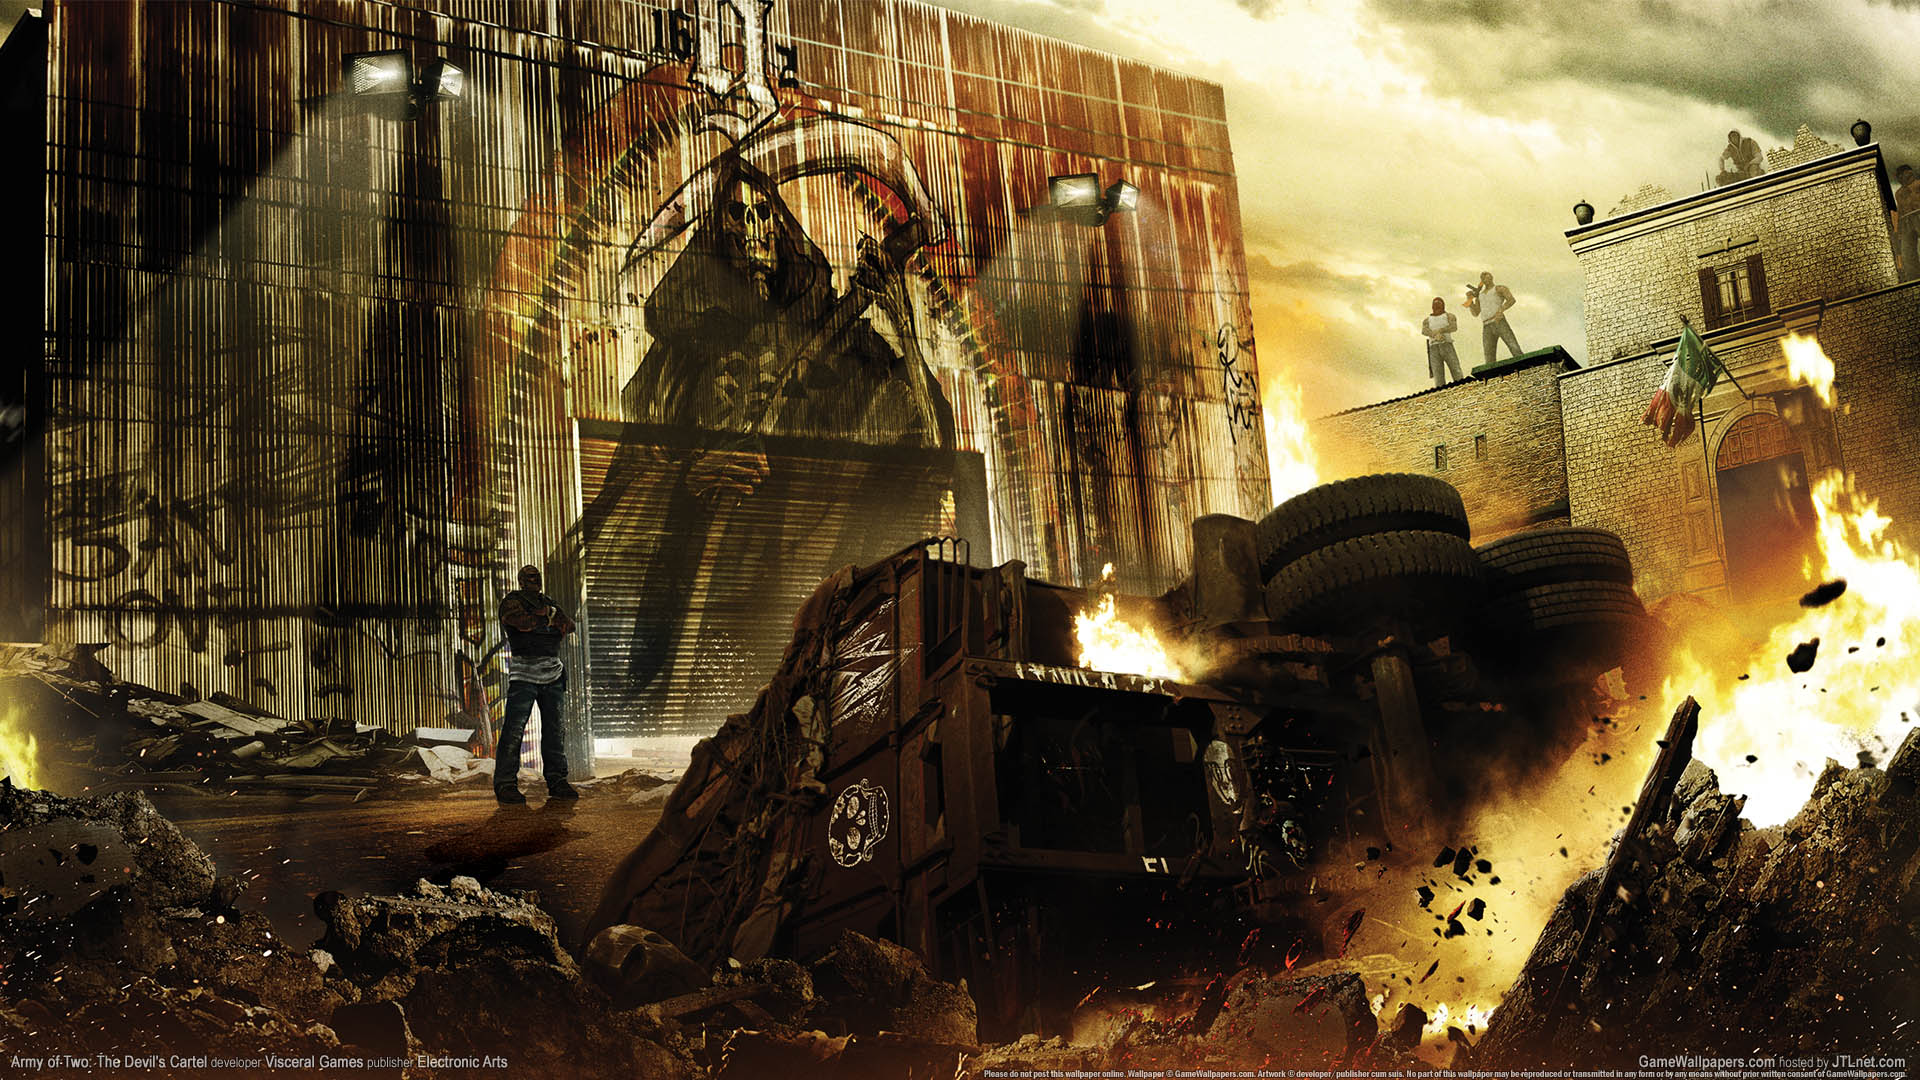 Army of Two: The Devil's Cartel fond d'cran 01 1920x1080